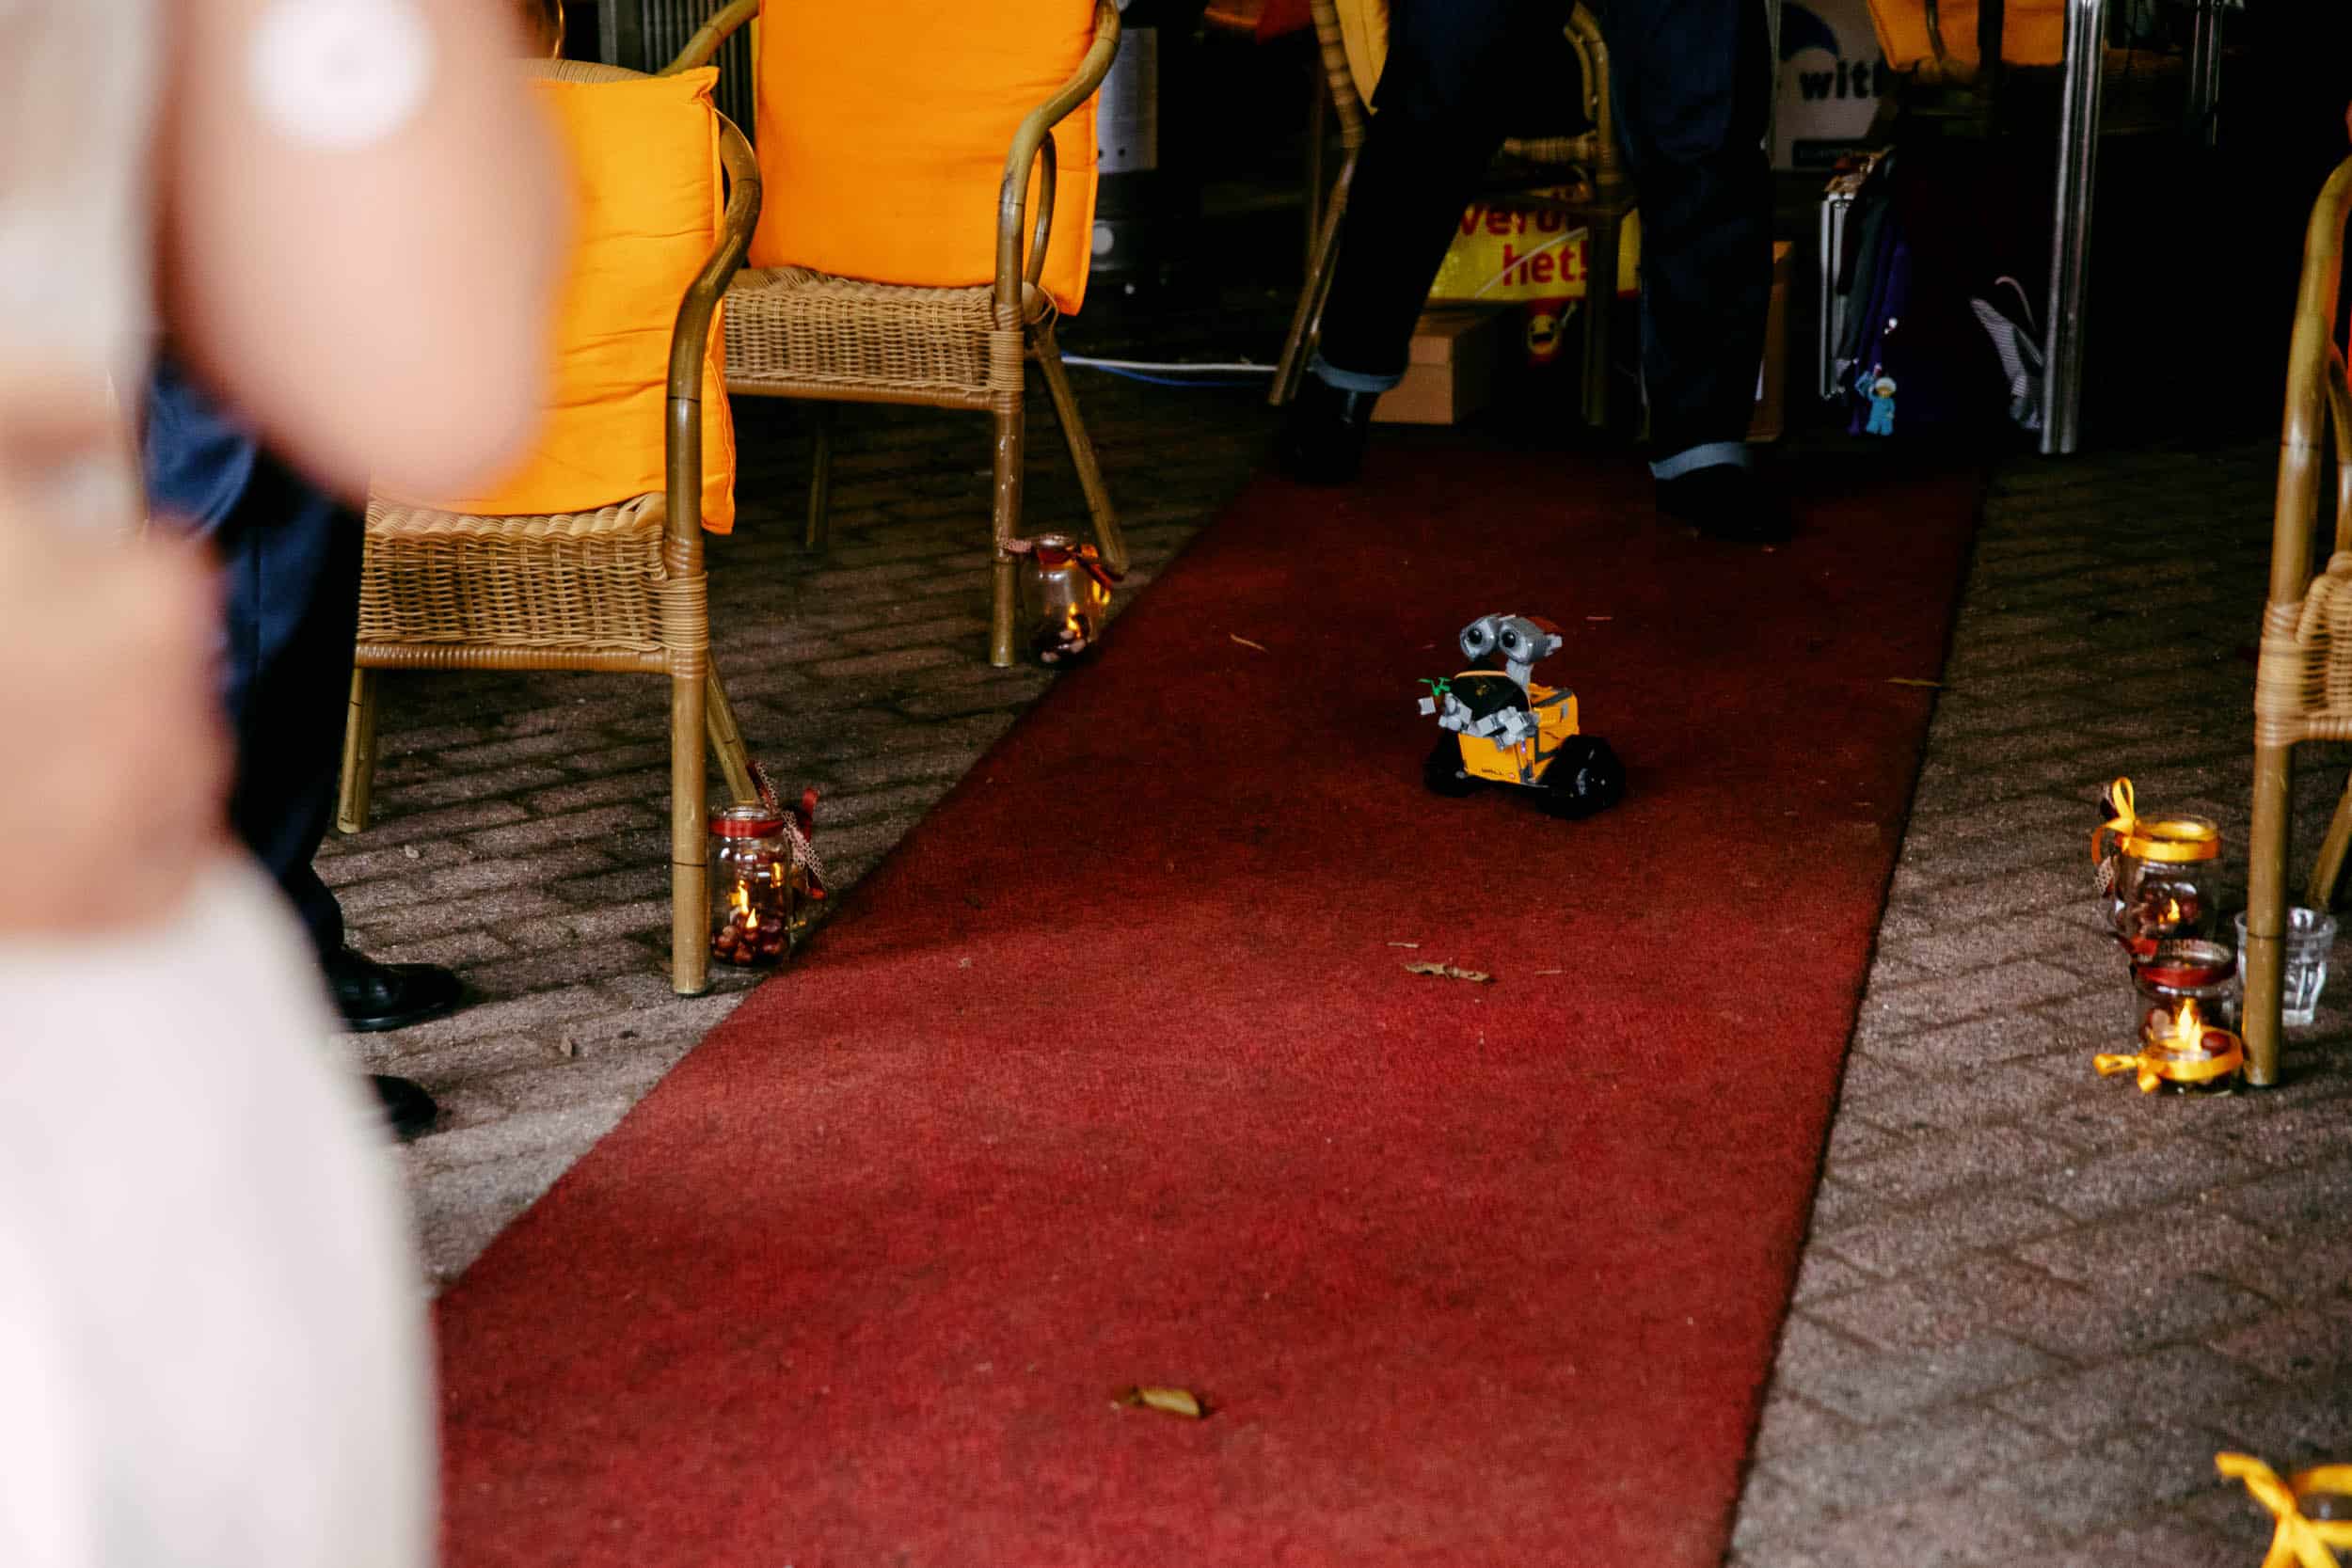 A toy car on a red carpet at a wedding-themed wedding.